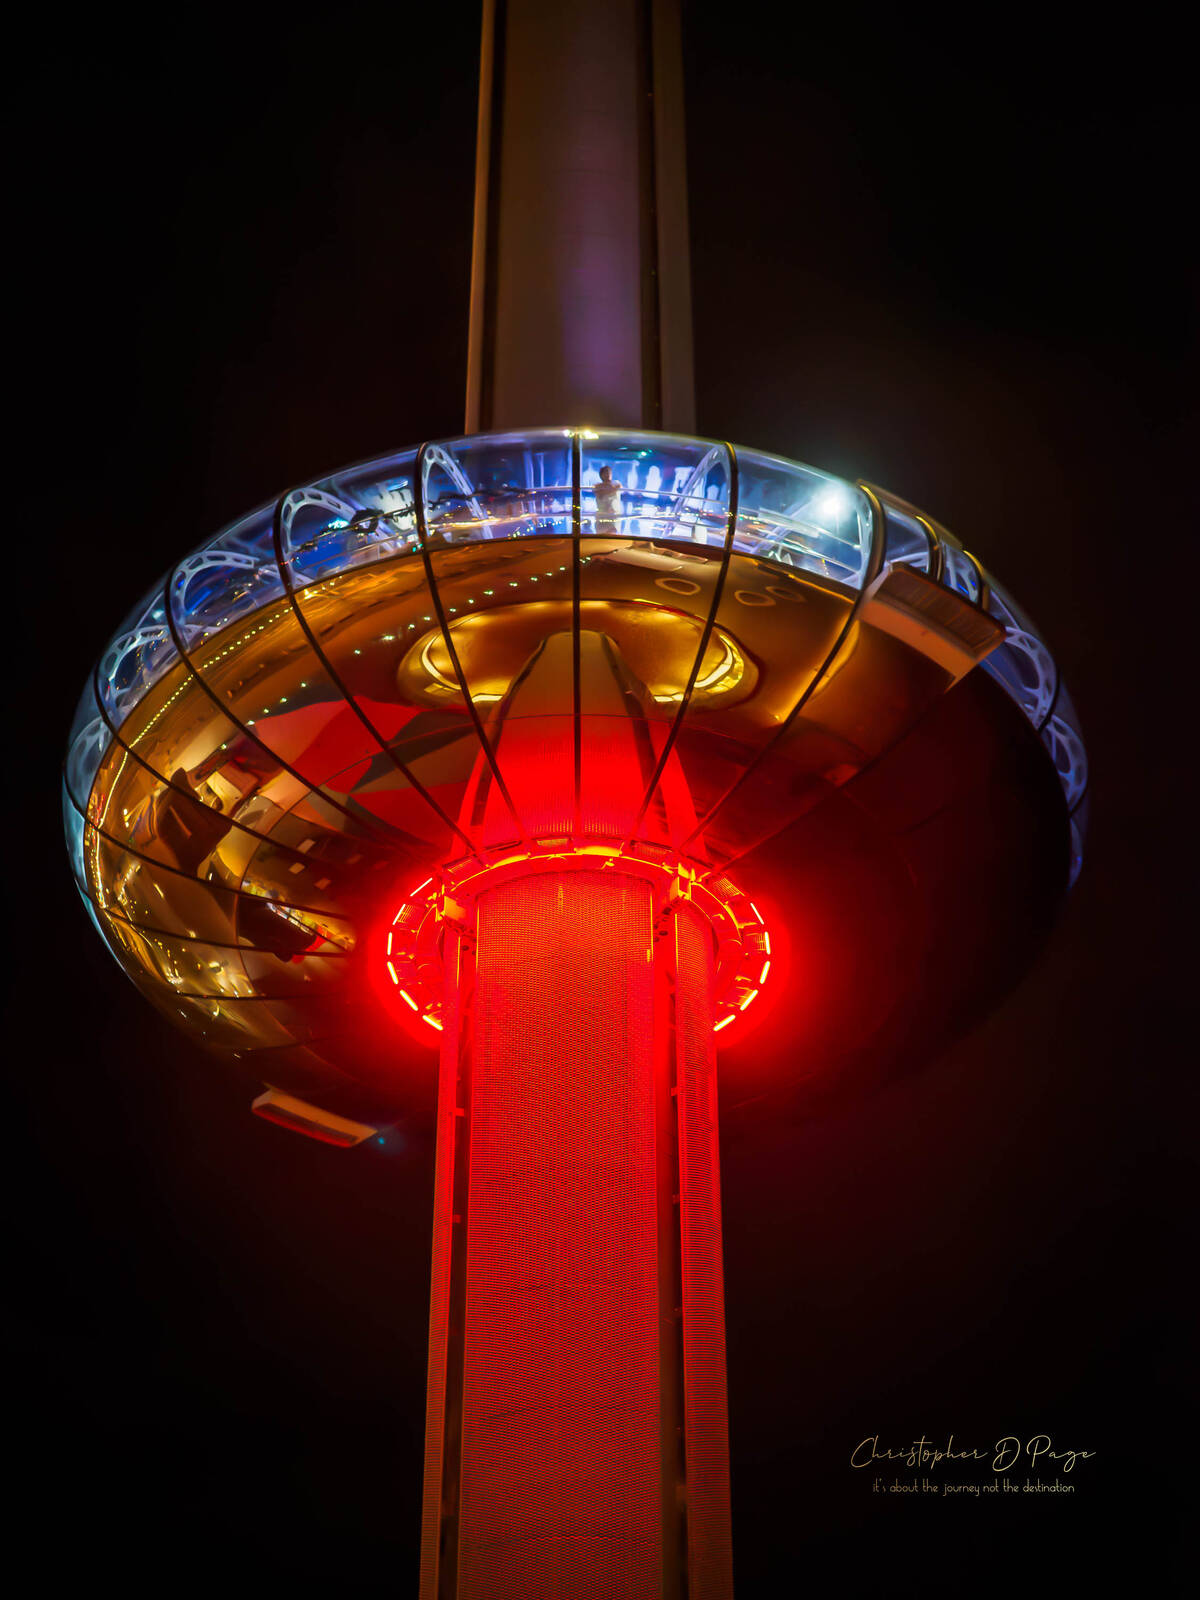 Image of View of the i360 Tower by Chris Page